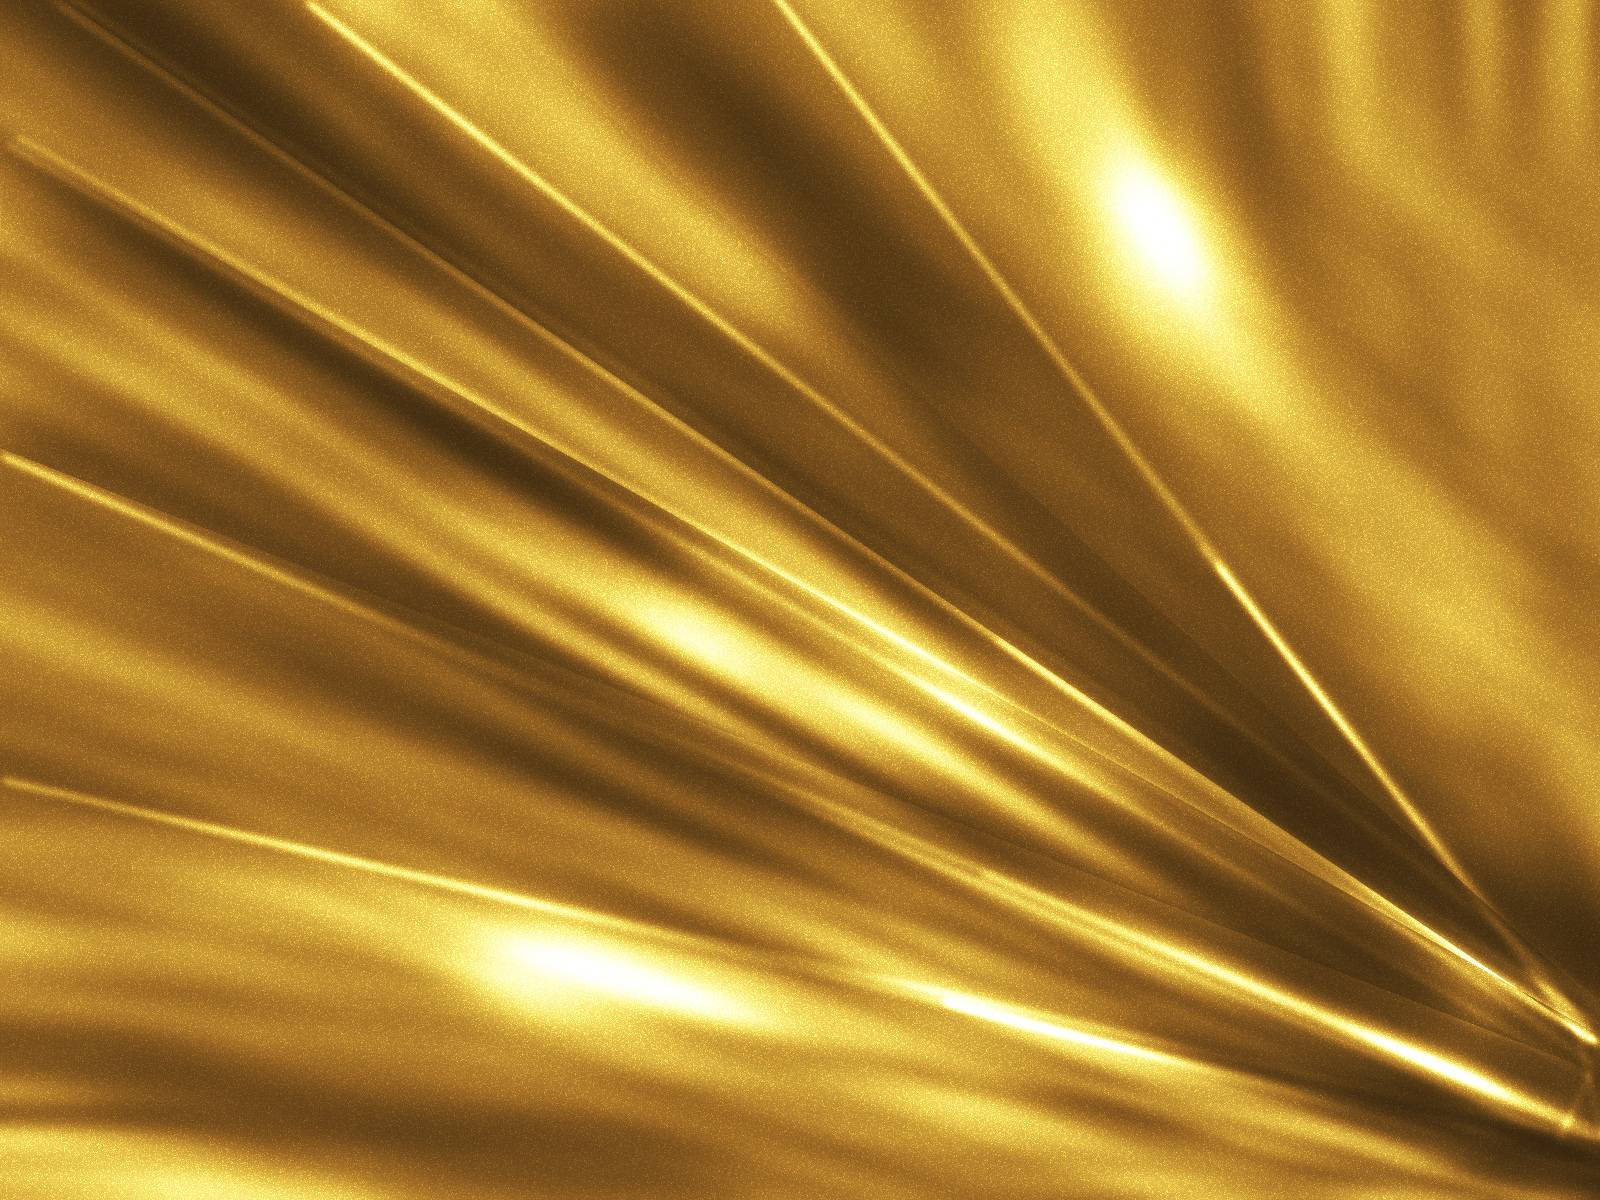 Plain Gold With Creases Wallpaper